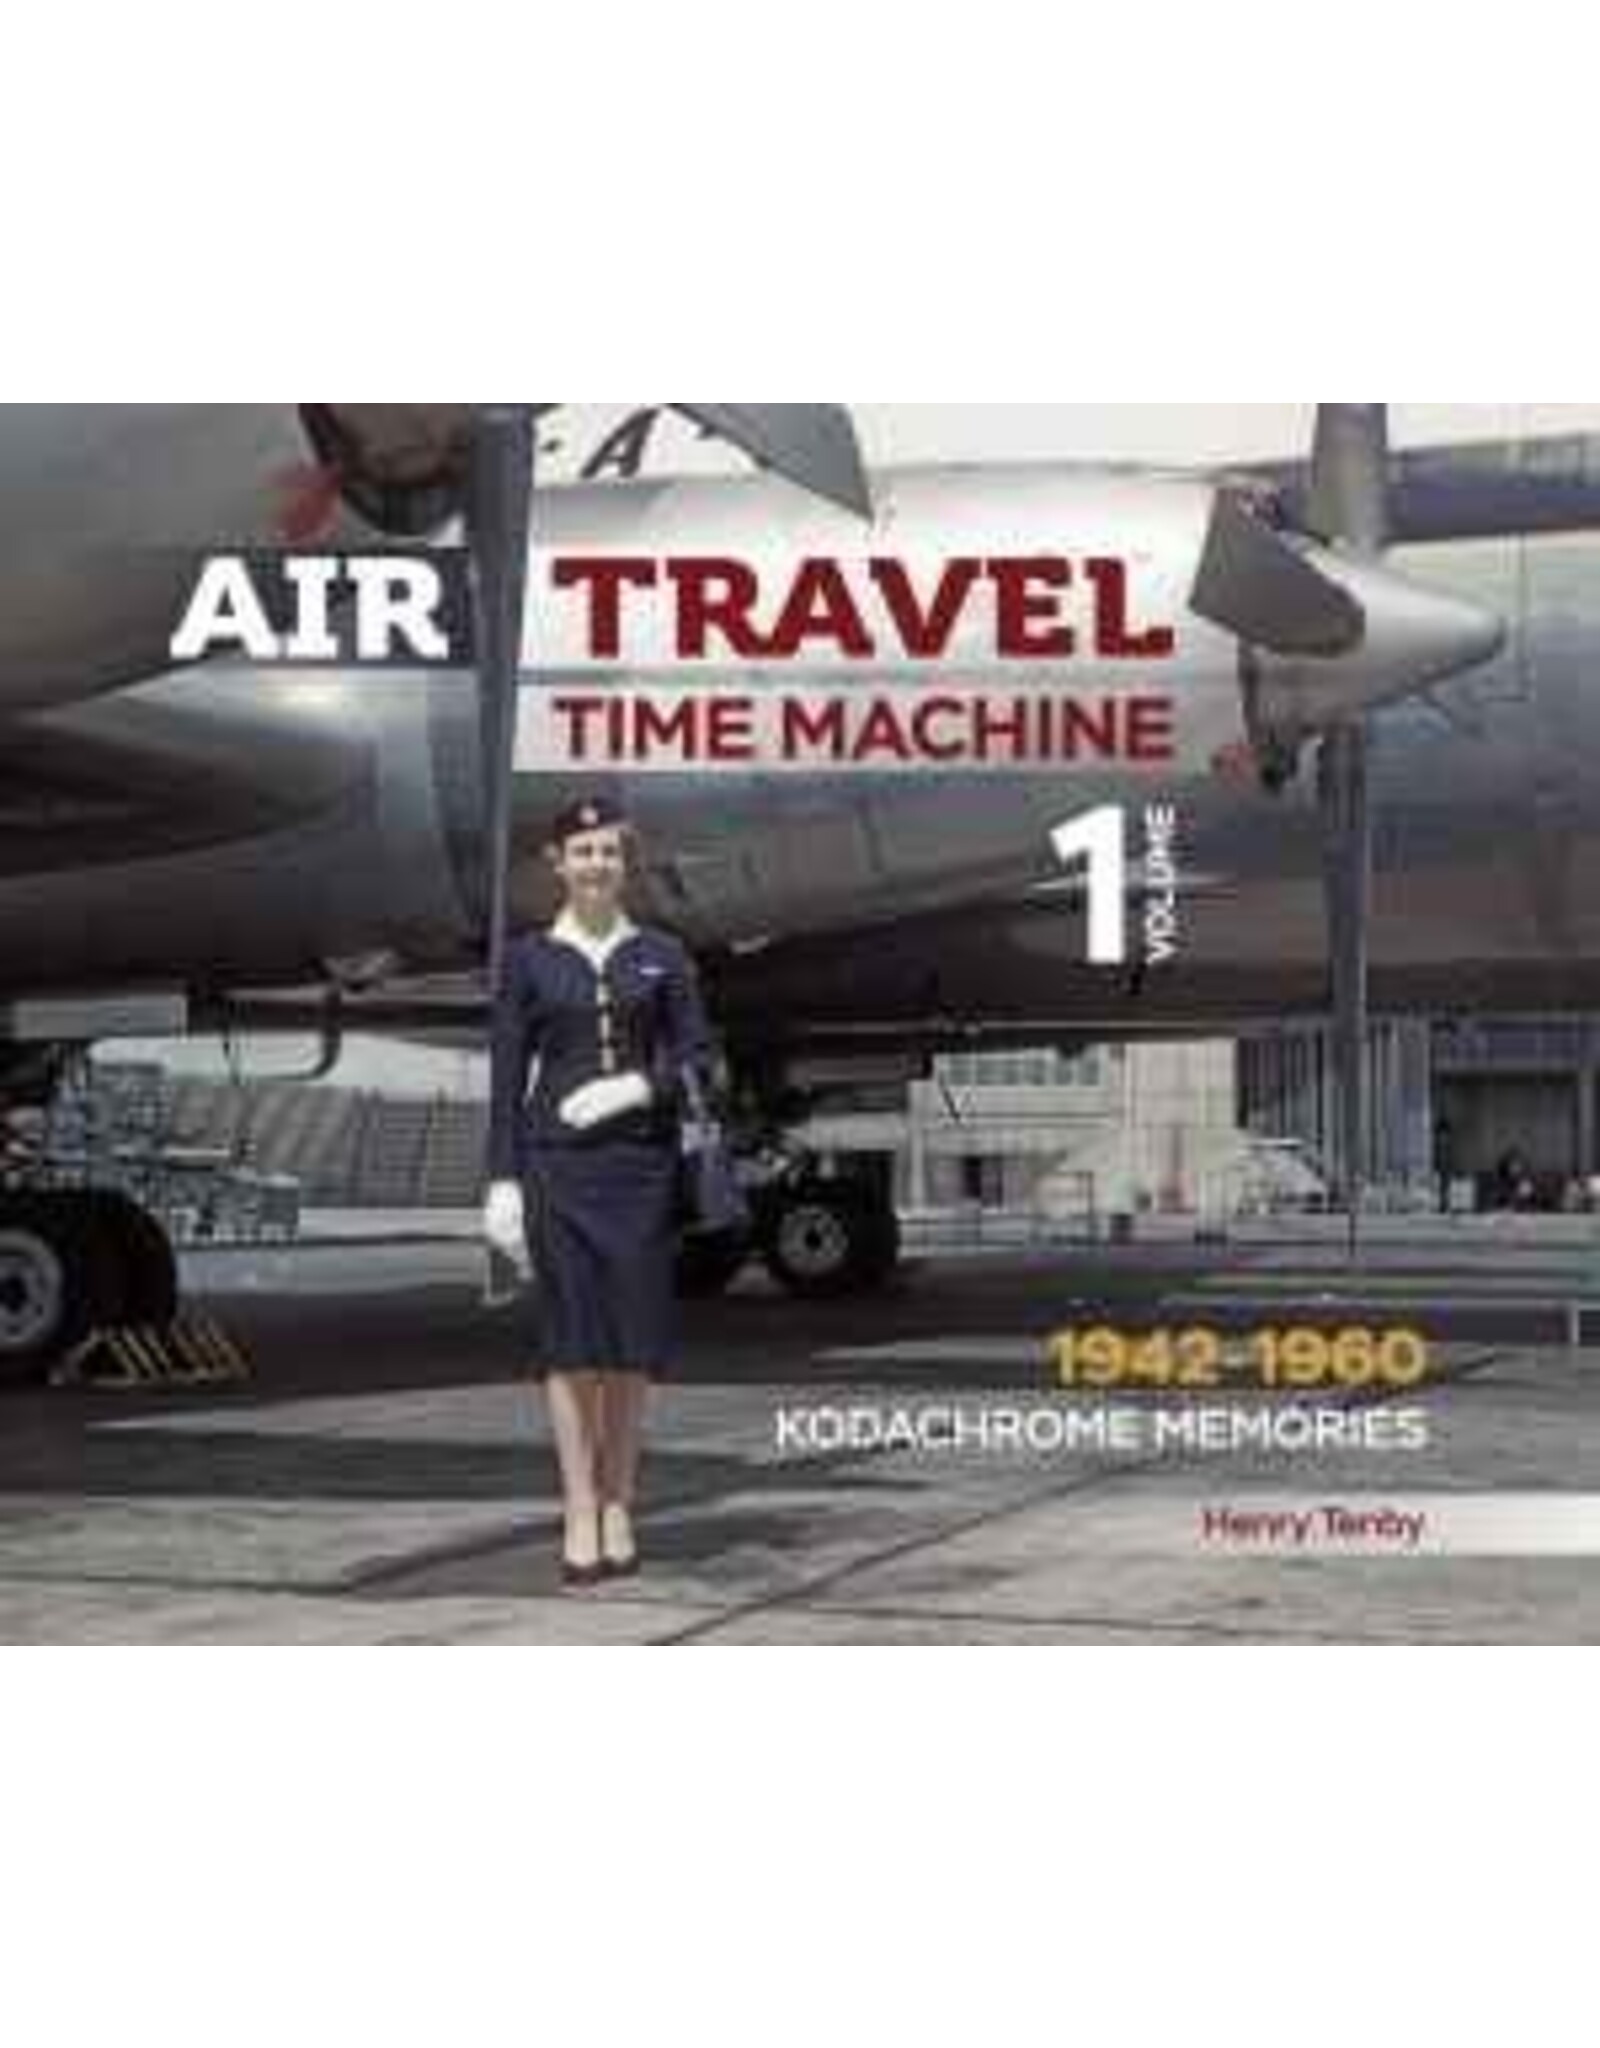 Air Travel Time Machine author Henry Tenby